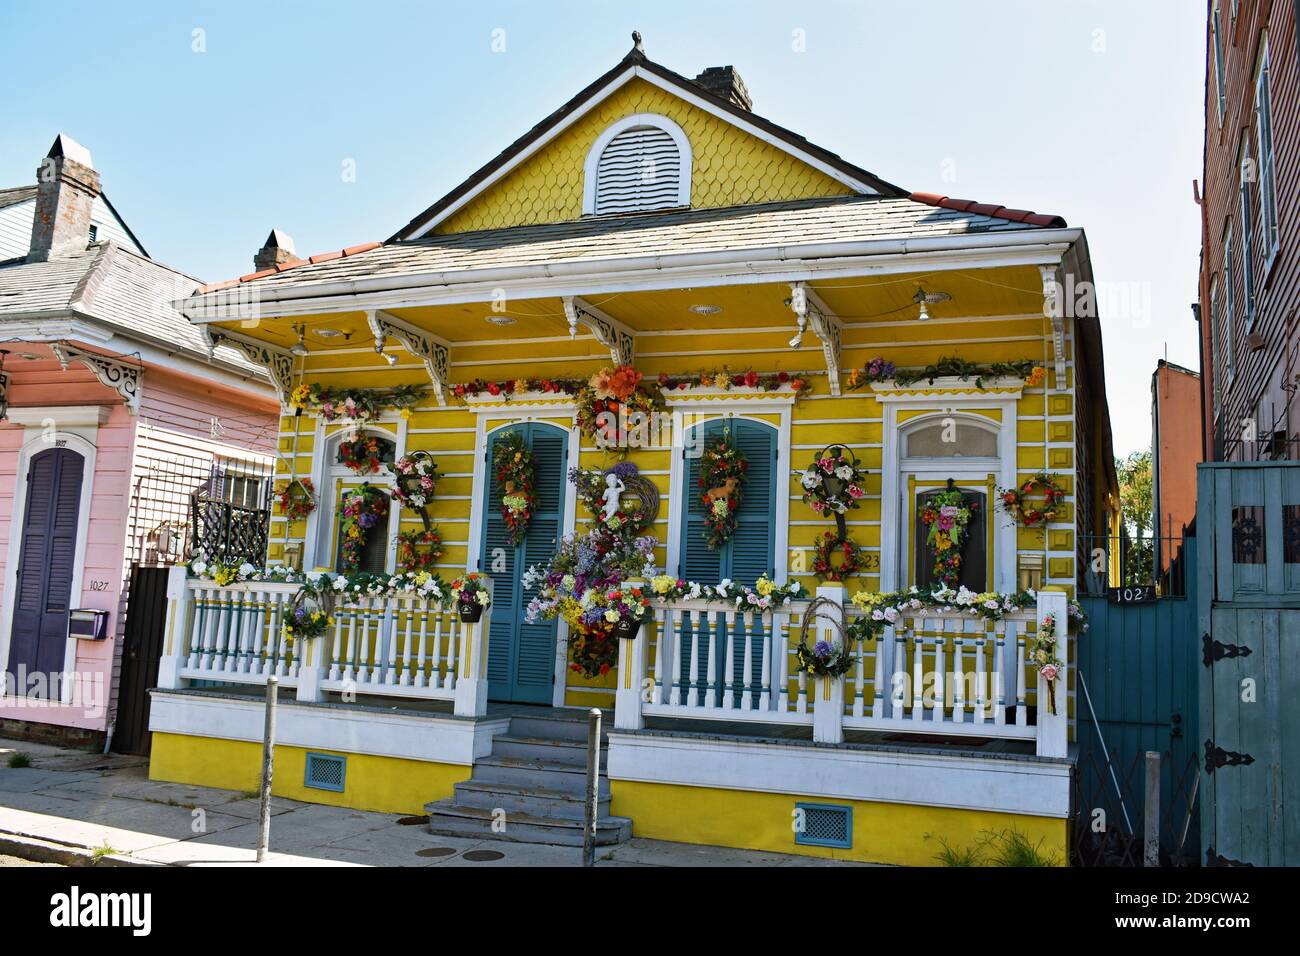 A traditional Creole cottage on St Ann Street in the historic French Quarter in New Orleans, Louisiana. The yellow house is decorated with flowers. Stock Photo